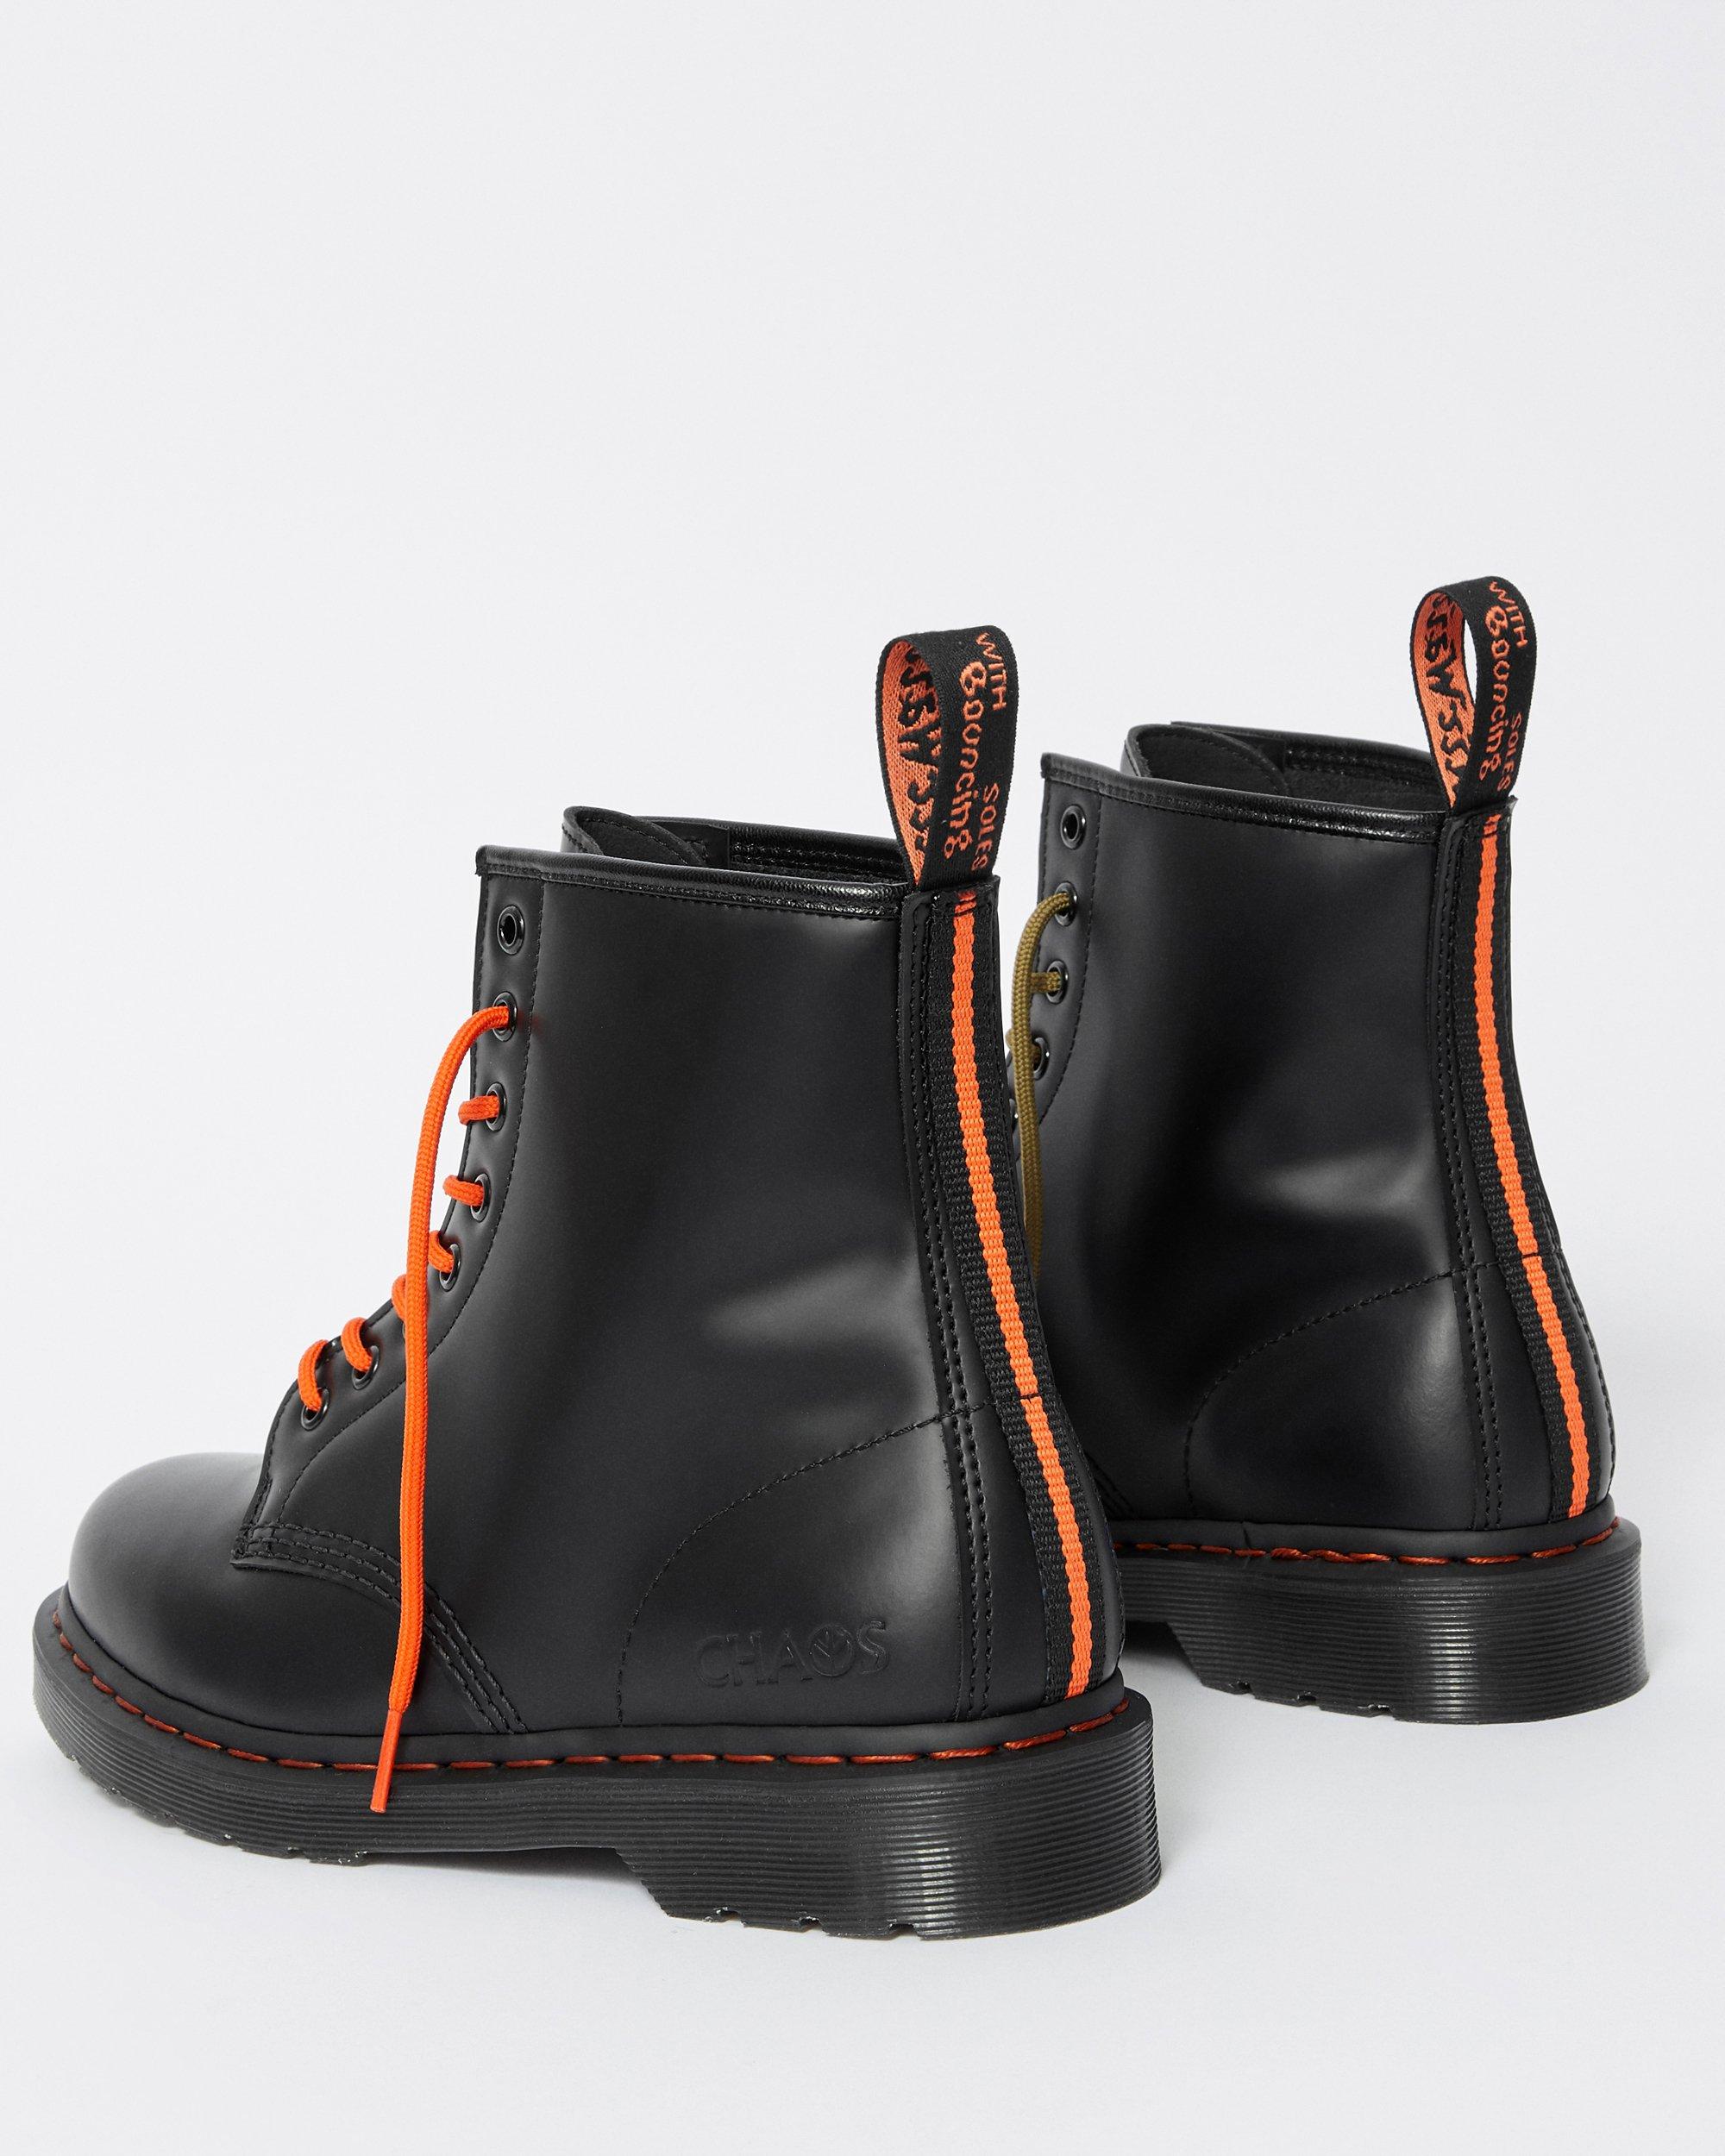 1460 Beams X Babylon Smooth Leather Boots | Dr. Martens